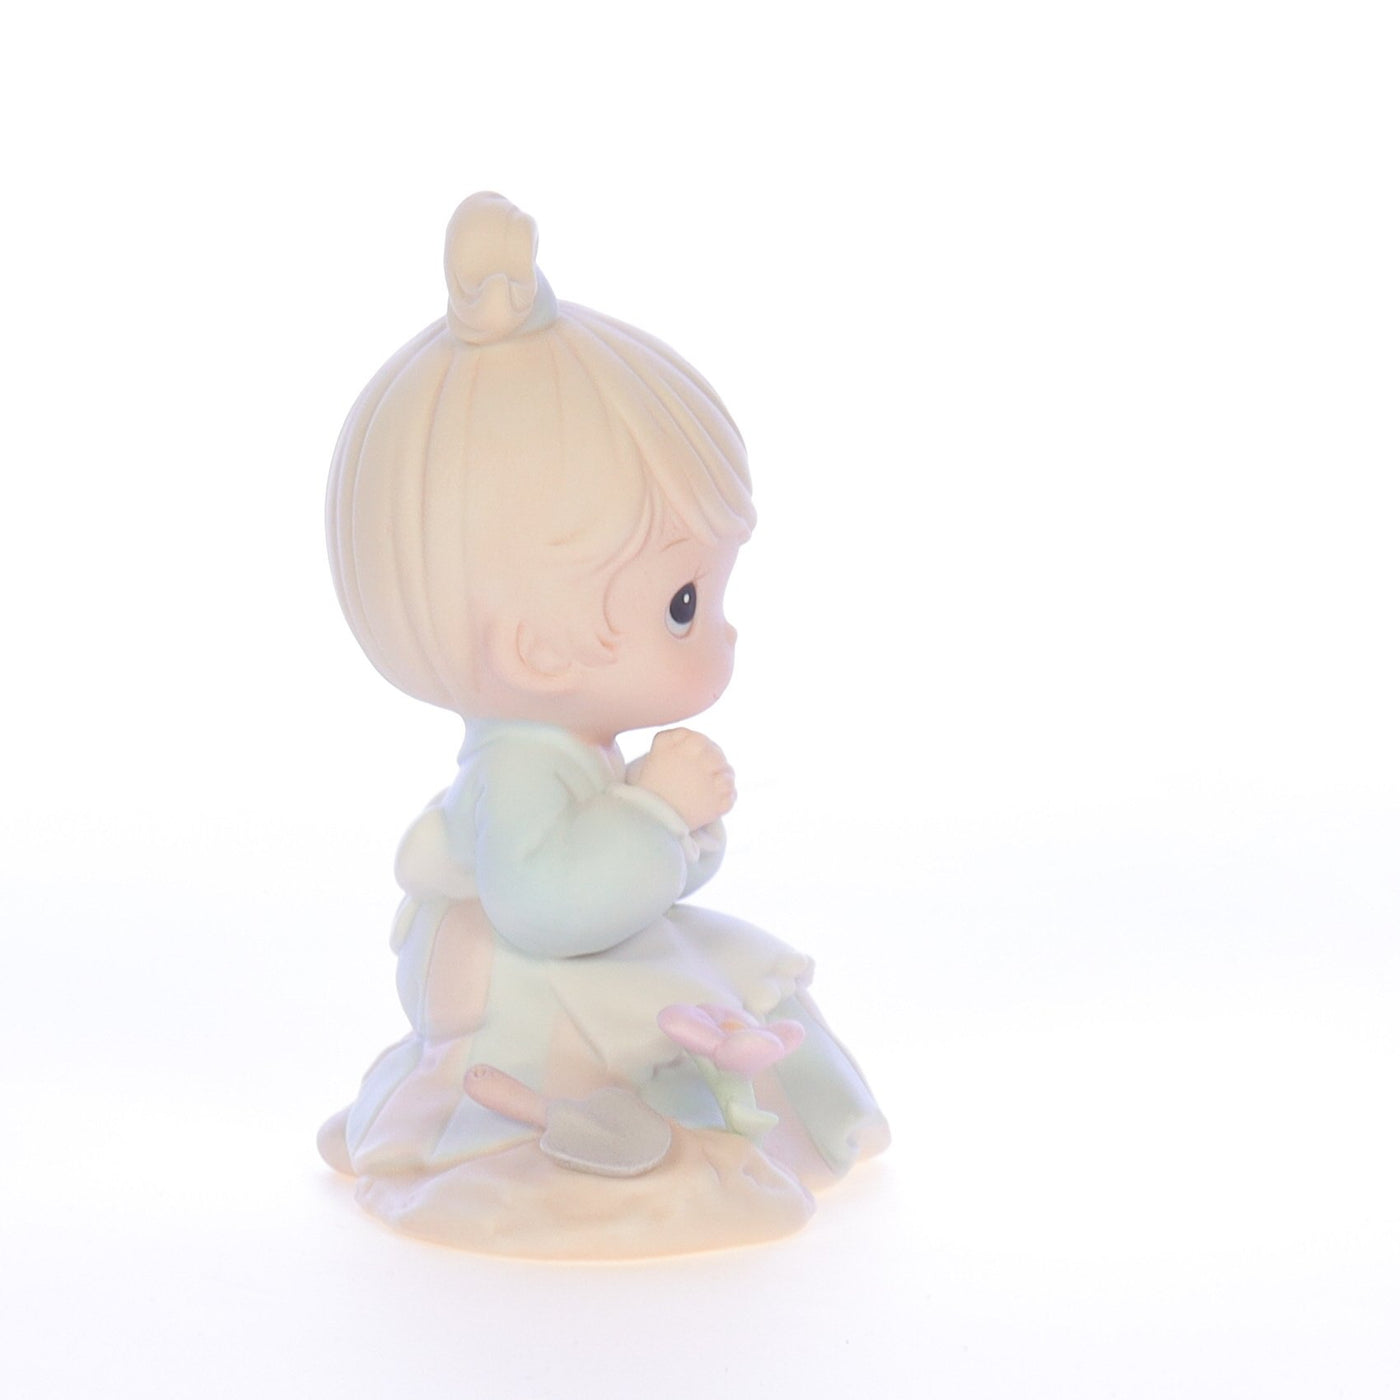 Precious_Moments_Porcelain_Figurine_Sowing_the_Seeds_of_Love_PM922_07.jpg